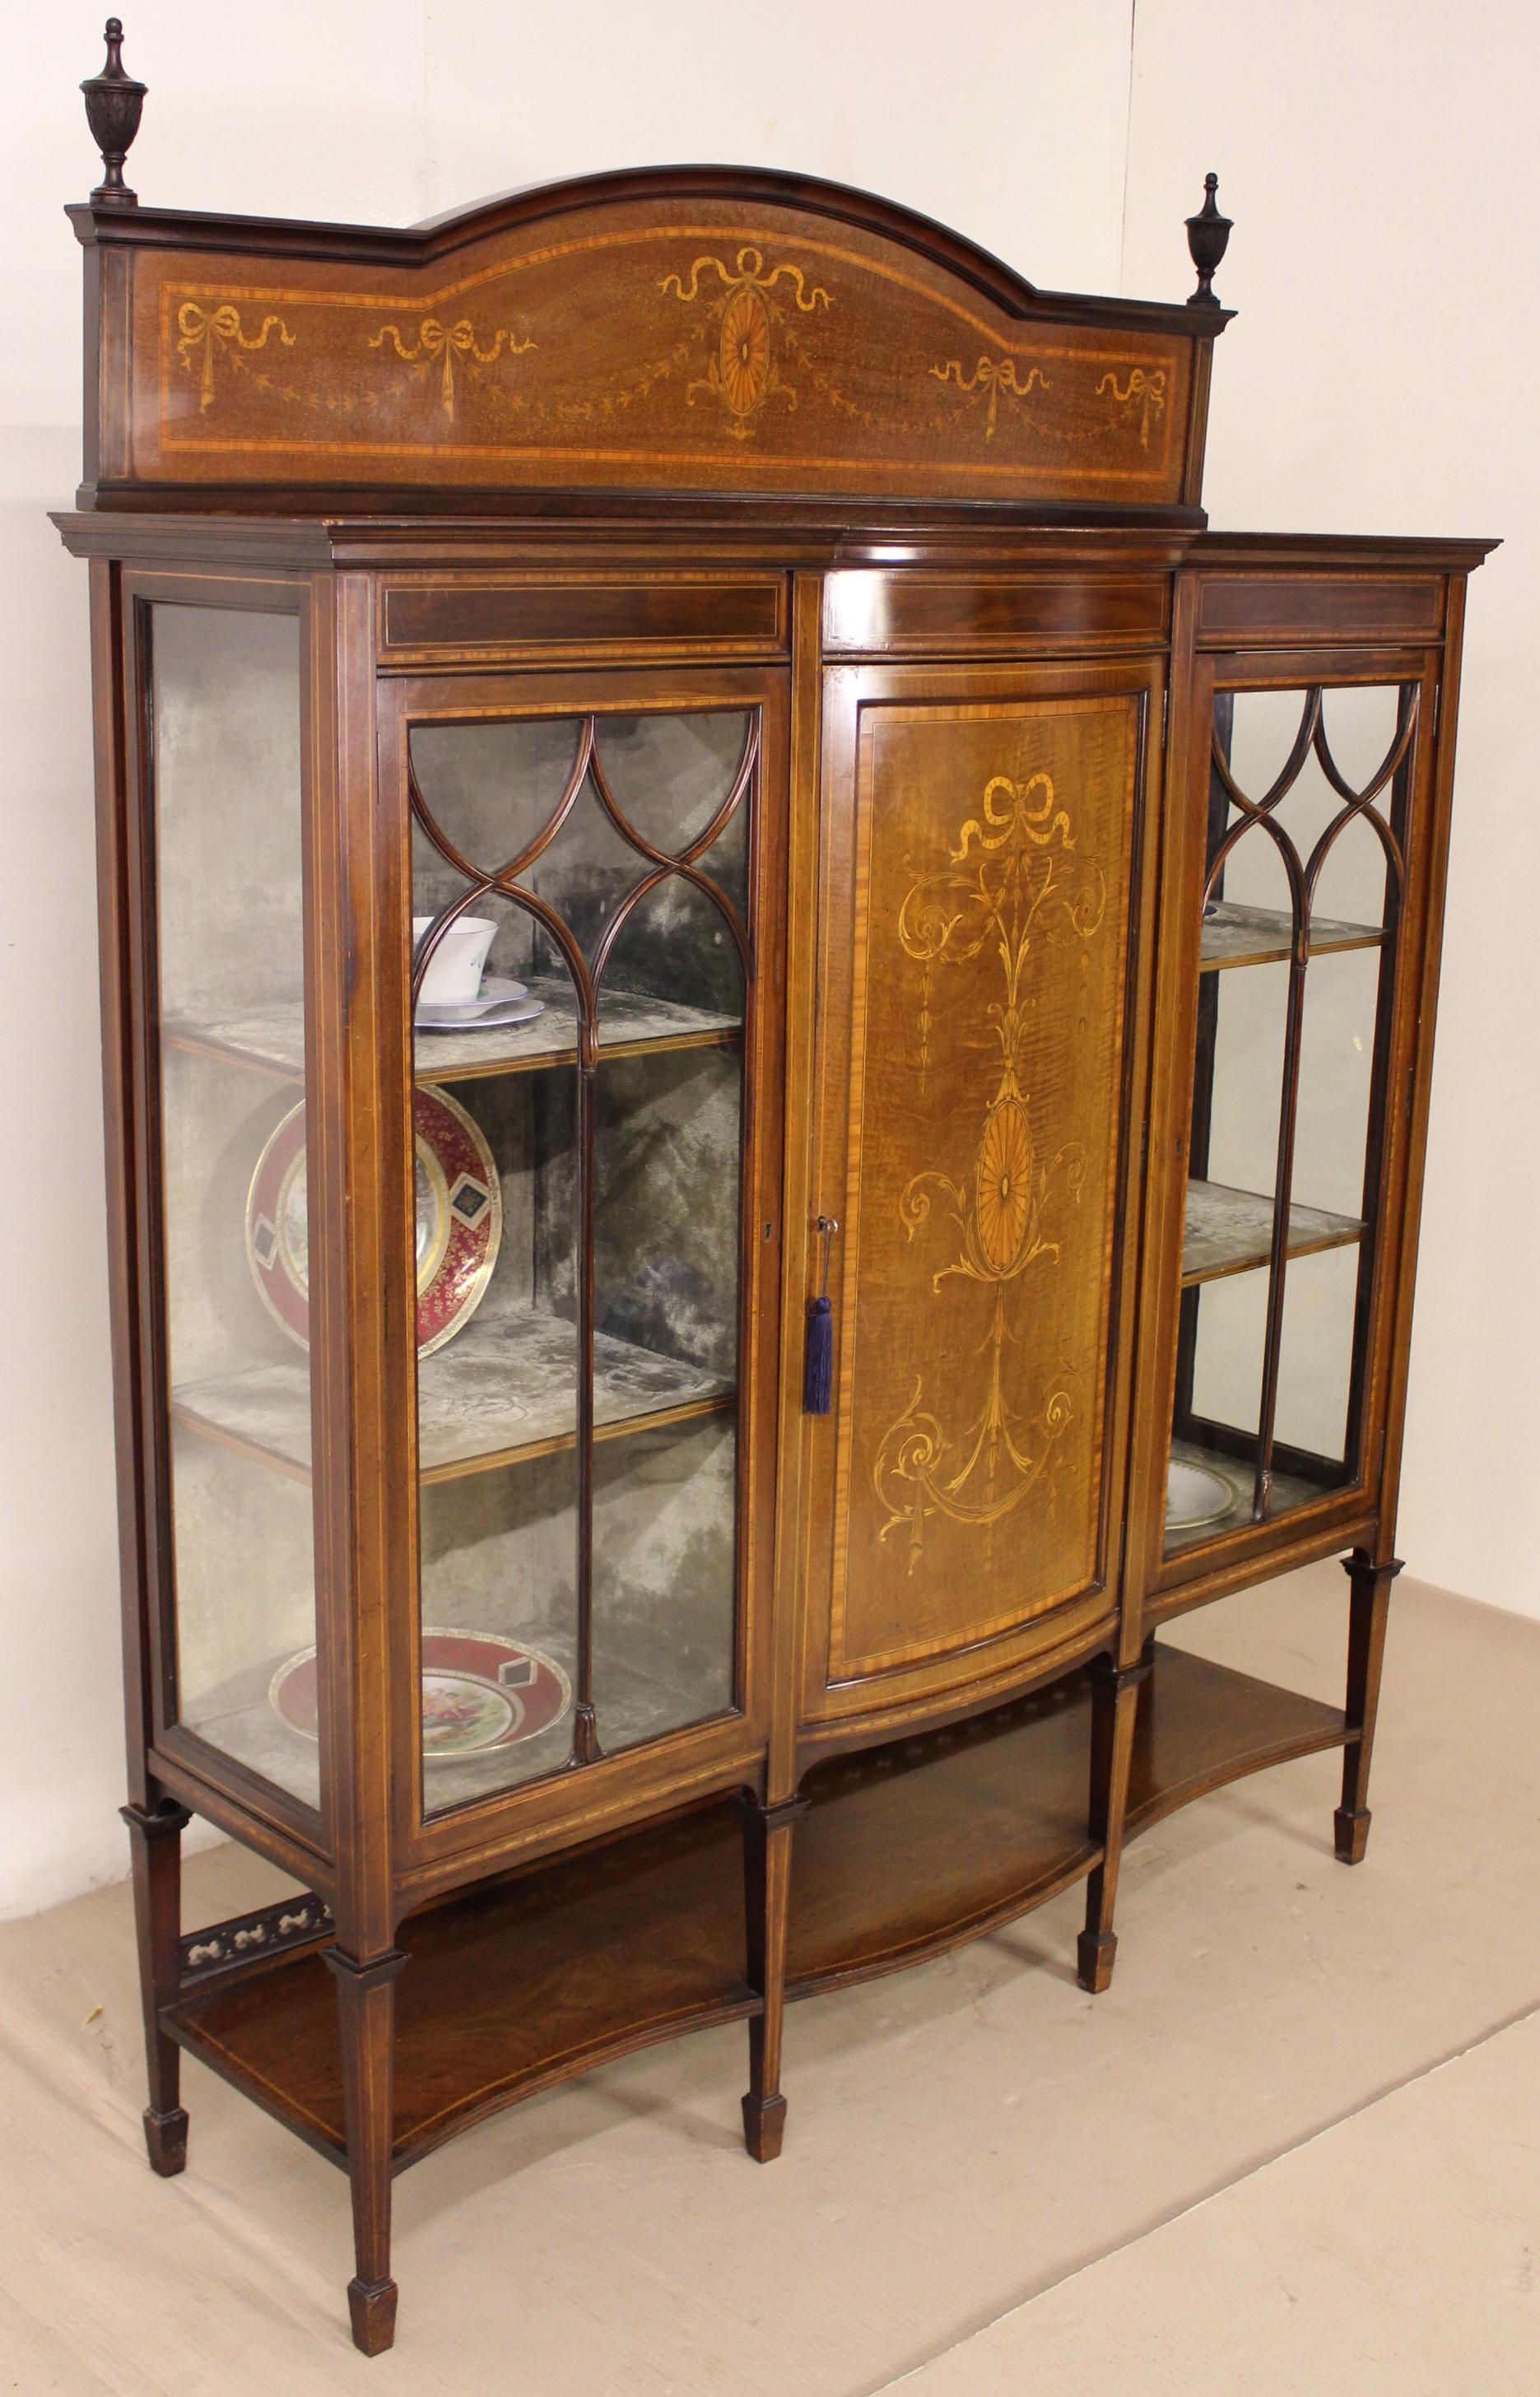 Edwardian Inlaid Mahogany Display Cabinet In Good Condition For Sale In Poling, West Sussex